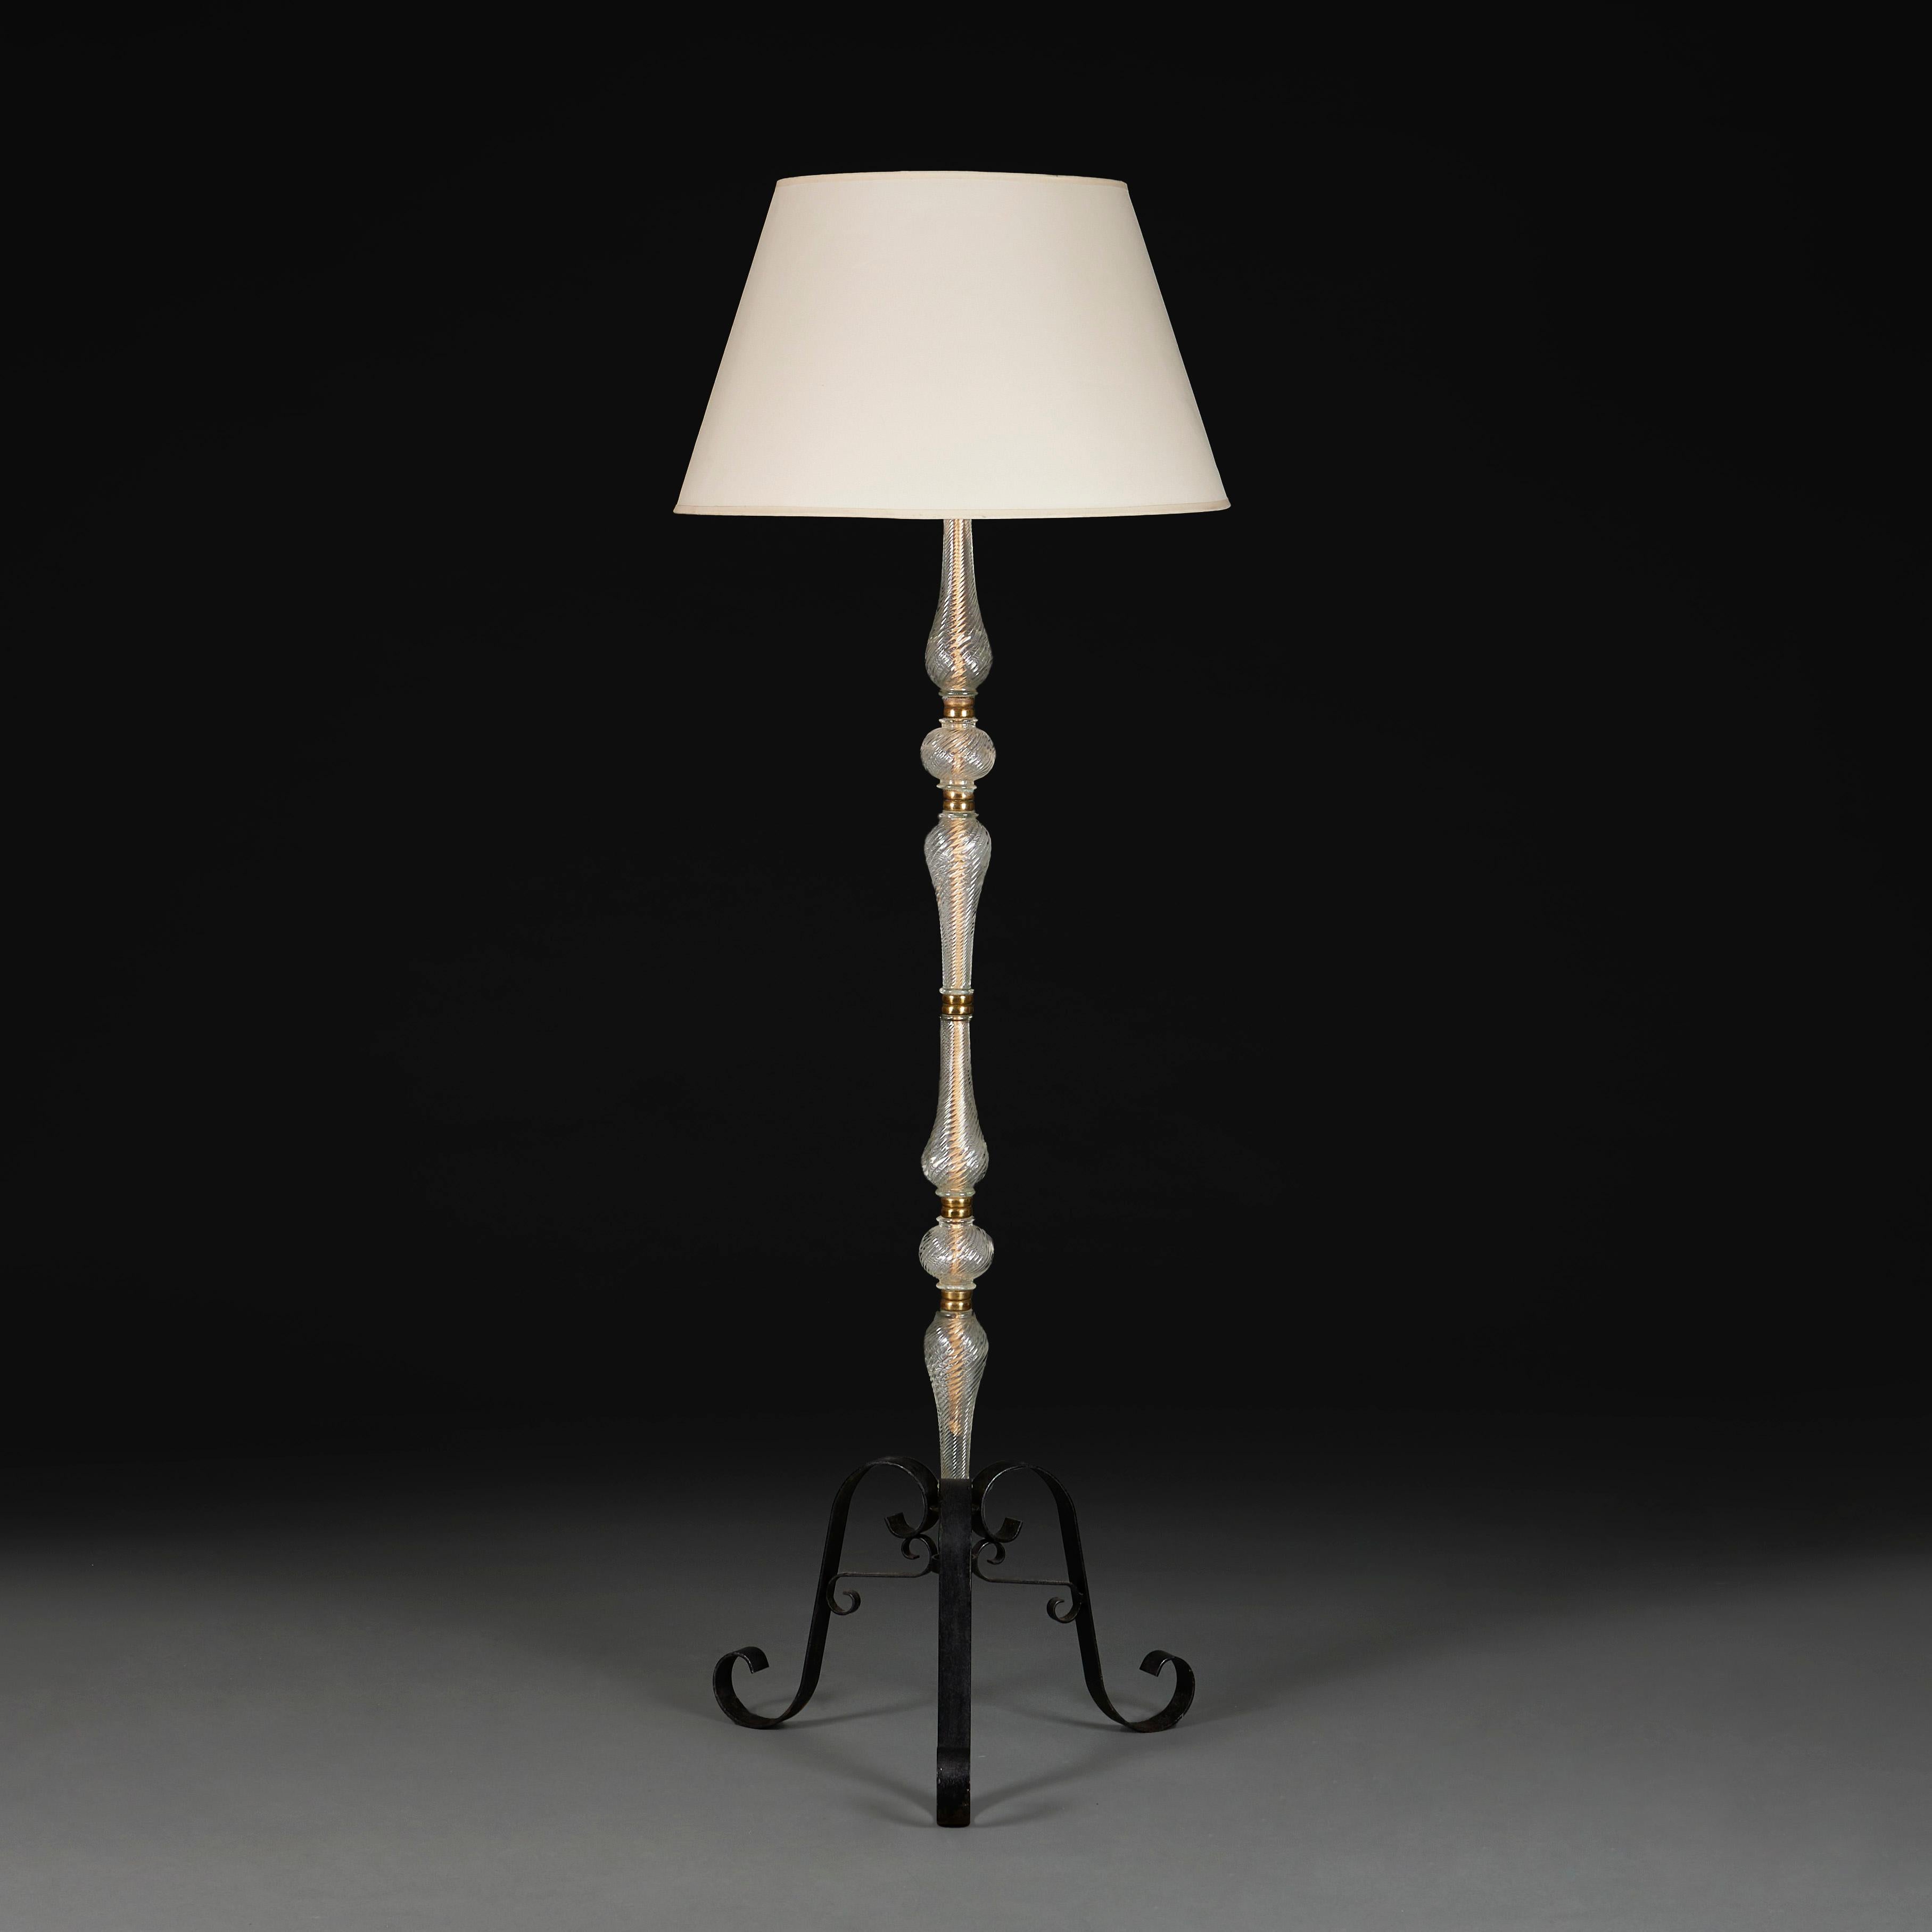 Italy, circa 1940

A mid twentieth century Murano glass standard lamp, with segmented twisted glass stem, the pieces all joined by brass rings, all supported on a wrought iron tripod base with scrolling feet.

Height of column 150.00cm

Width of